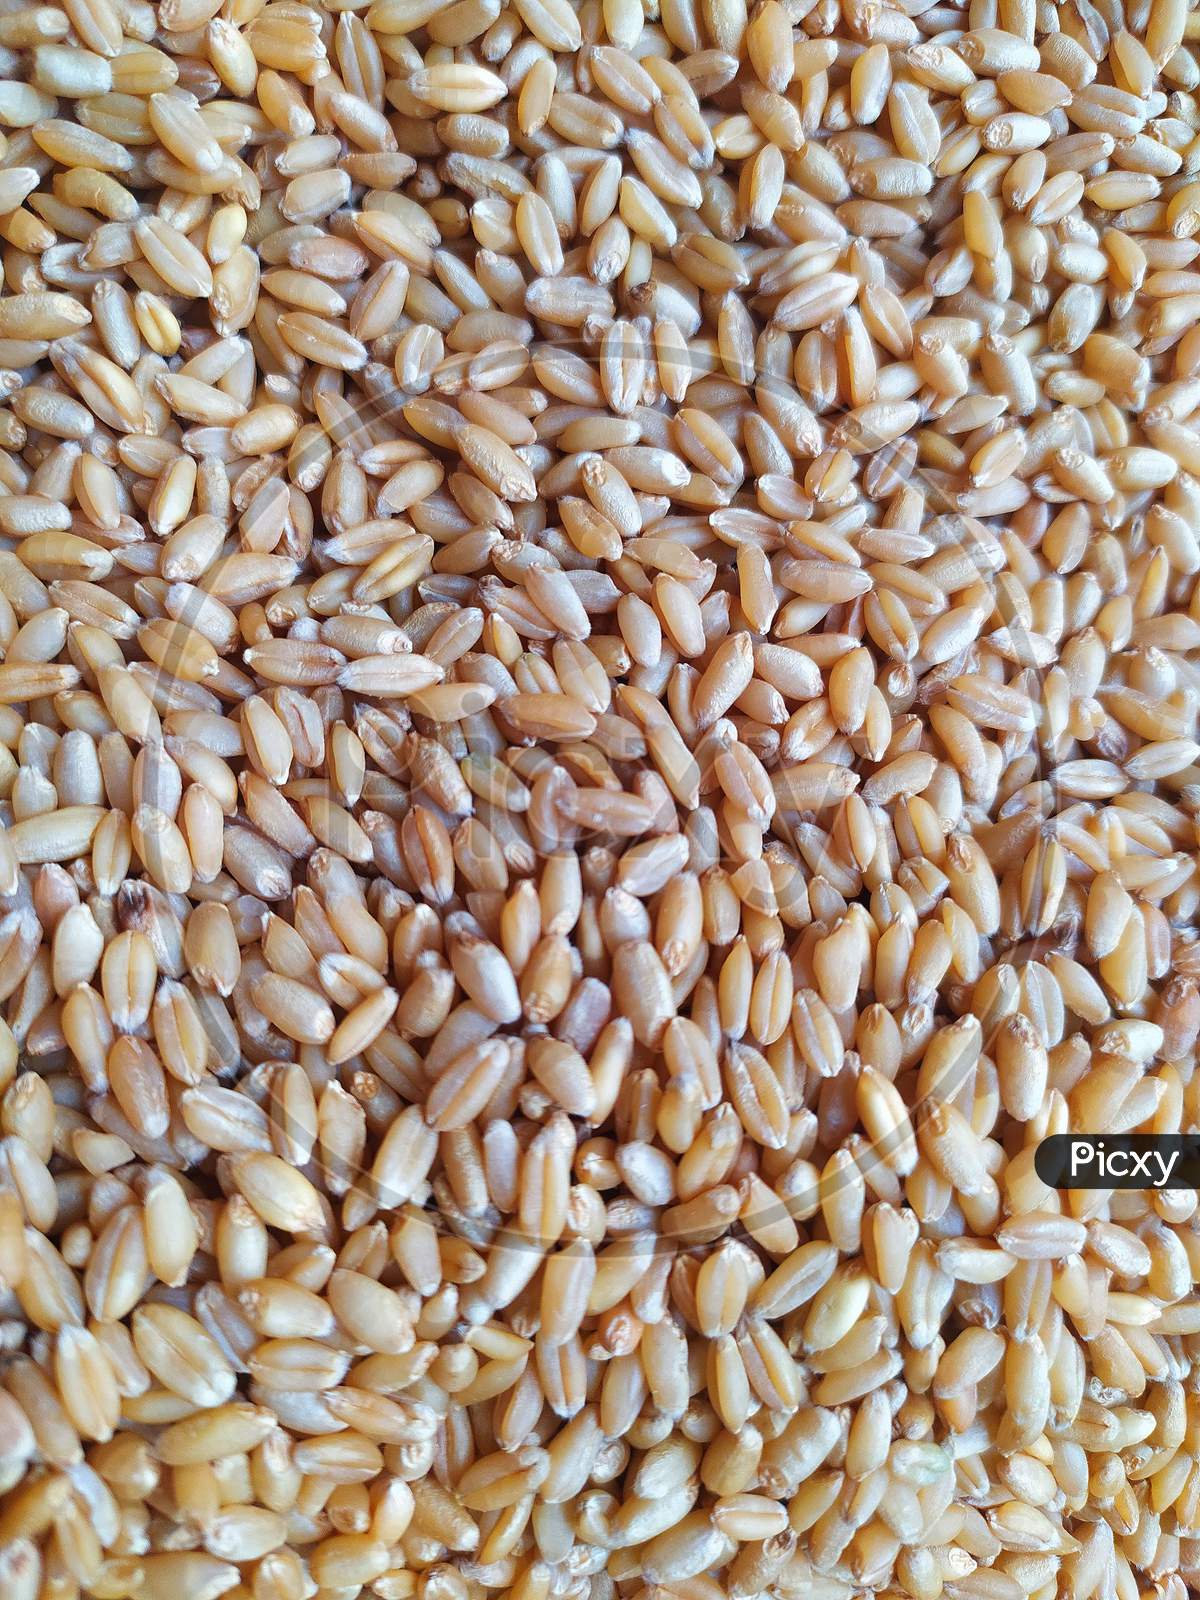 Background texture of uncooked Wheat